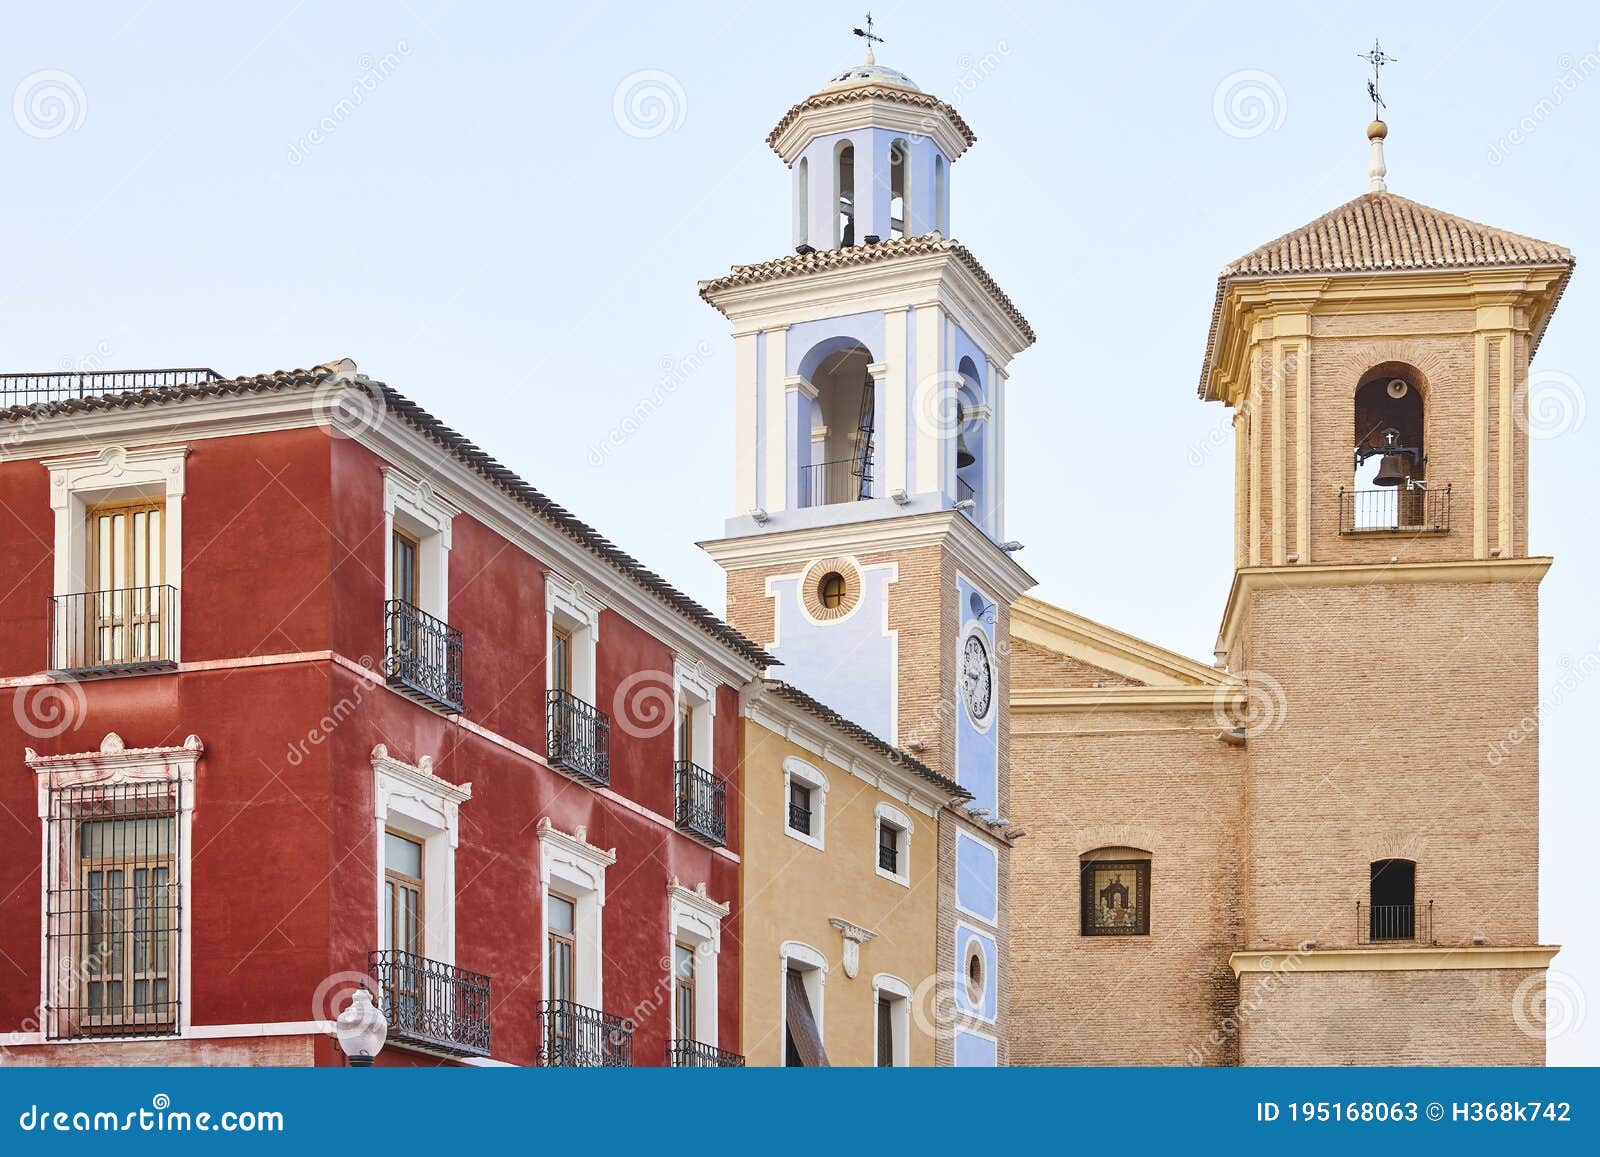 main square with picturesque buildings in mula village, murcia